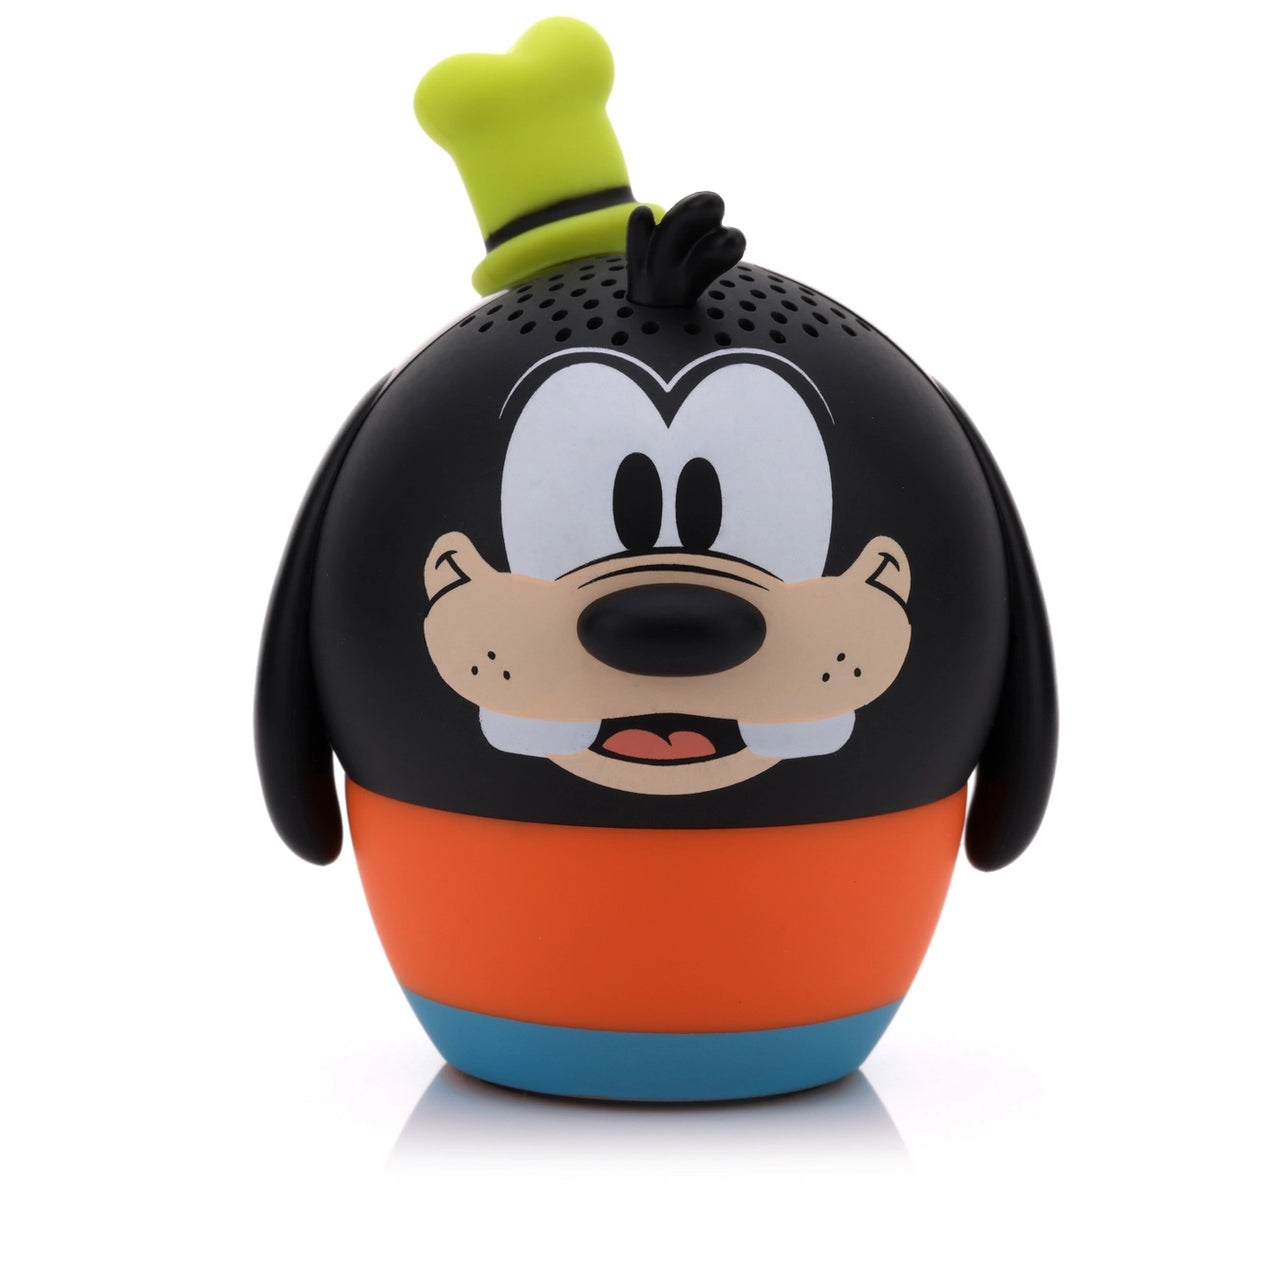 Goofy- Bitty Boomers Collectable Bluetooth Speaker